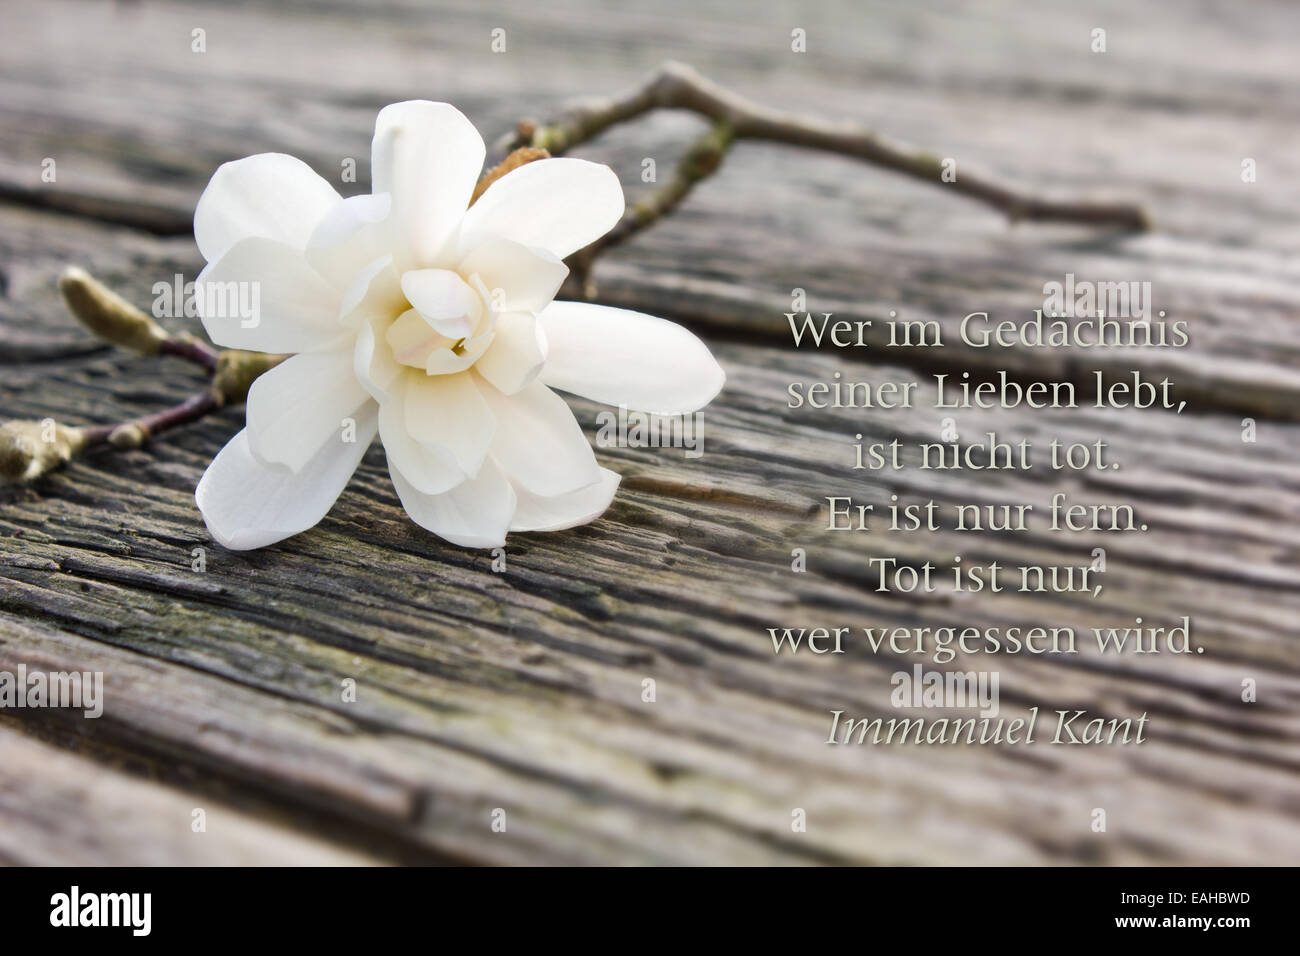 german mourning card with white magnolia Stock Photo